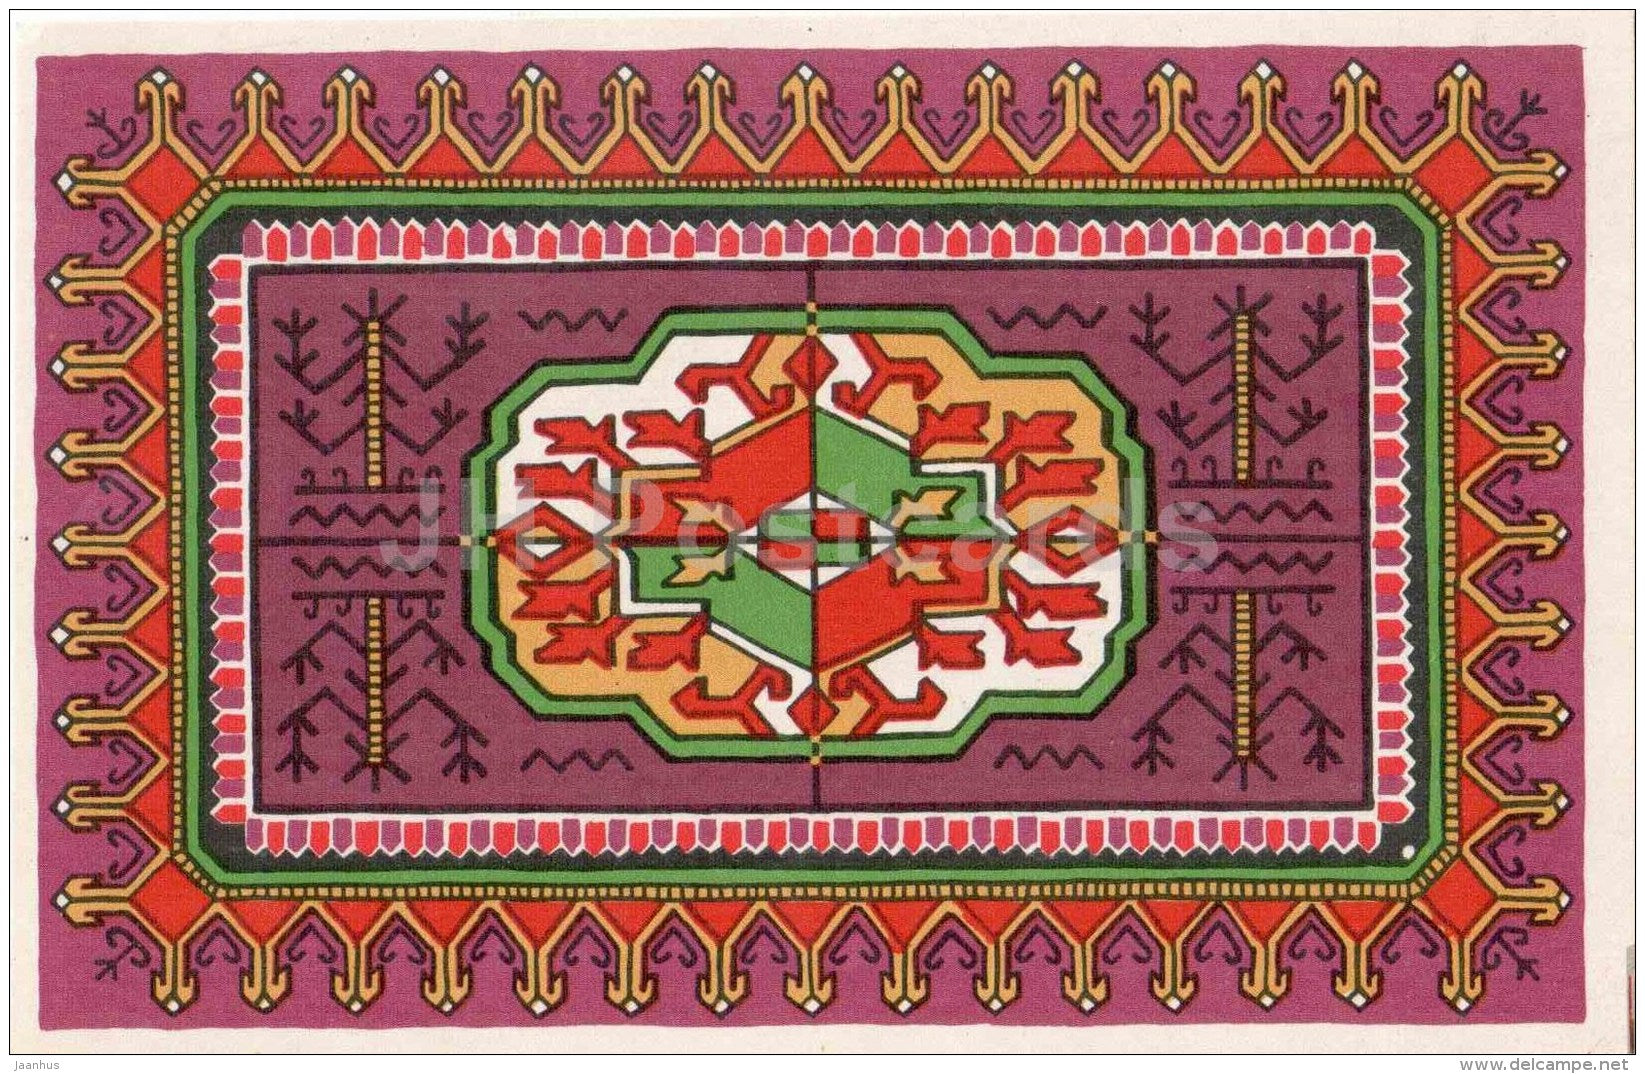 Turkmenia - Ornaments of the Nations of the USSR - patterns - 1970 - Russia USSR - unused - JH Postcards